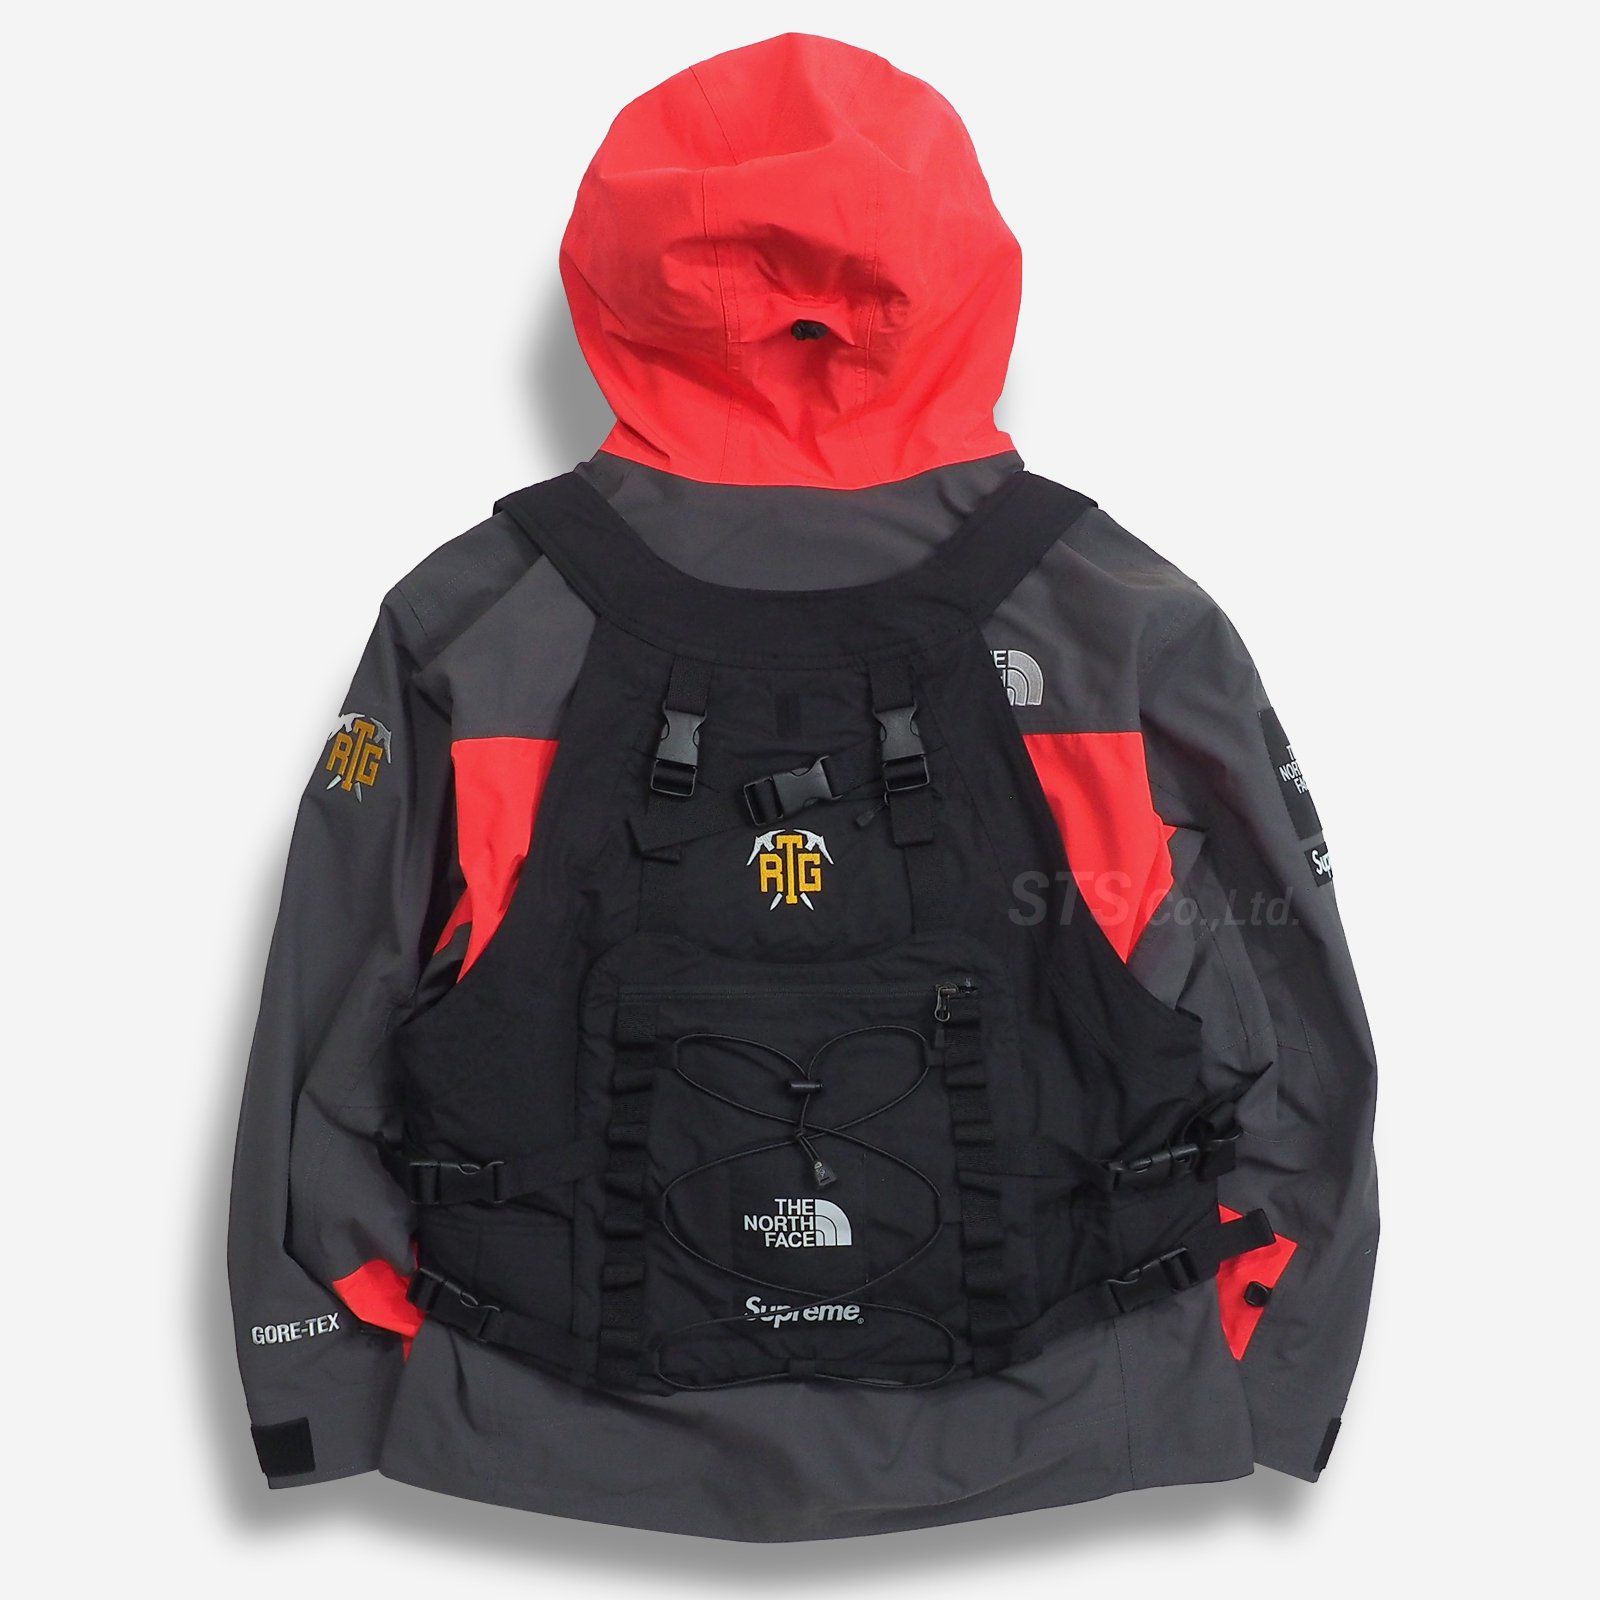 THE NORTH FACE　RTG Lining Jacketポリエステル100％